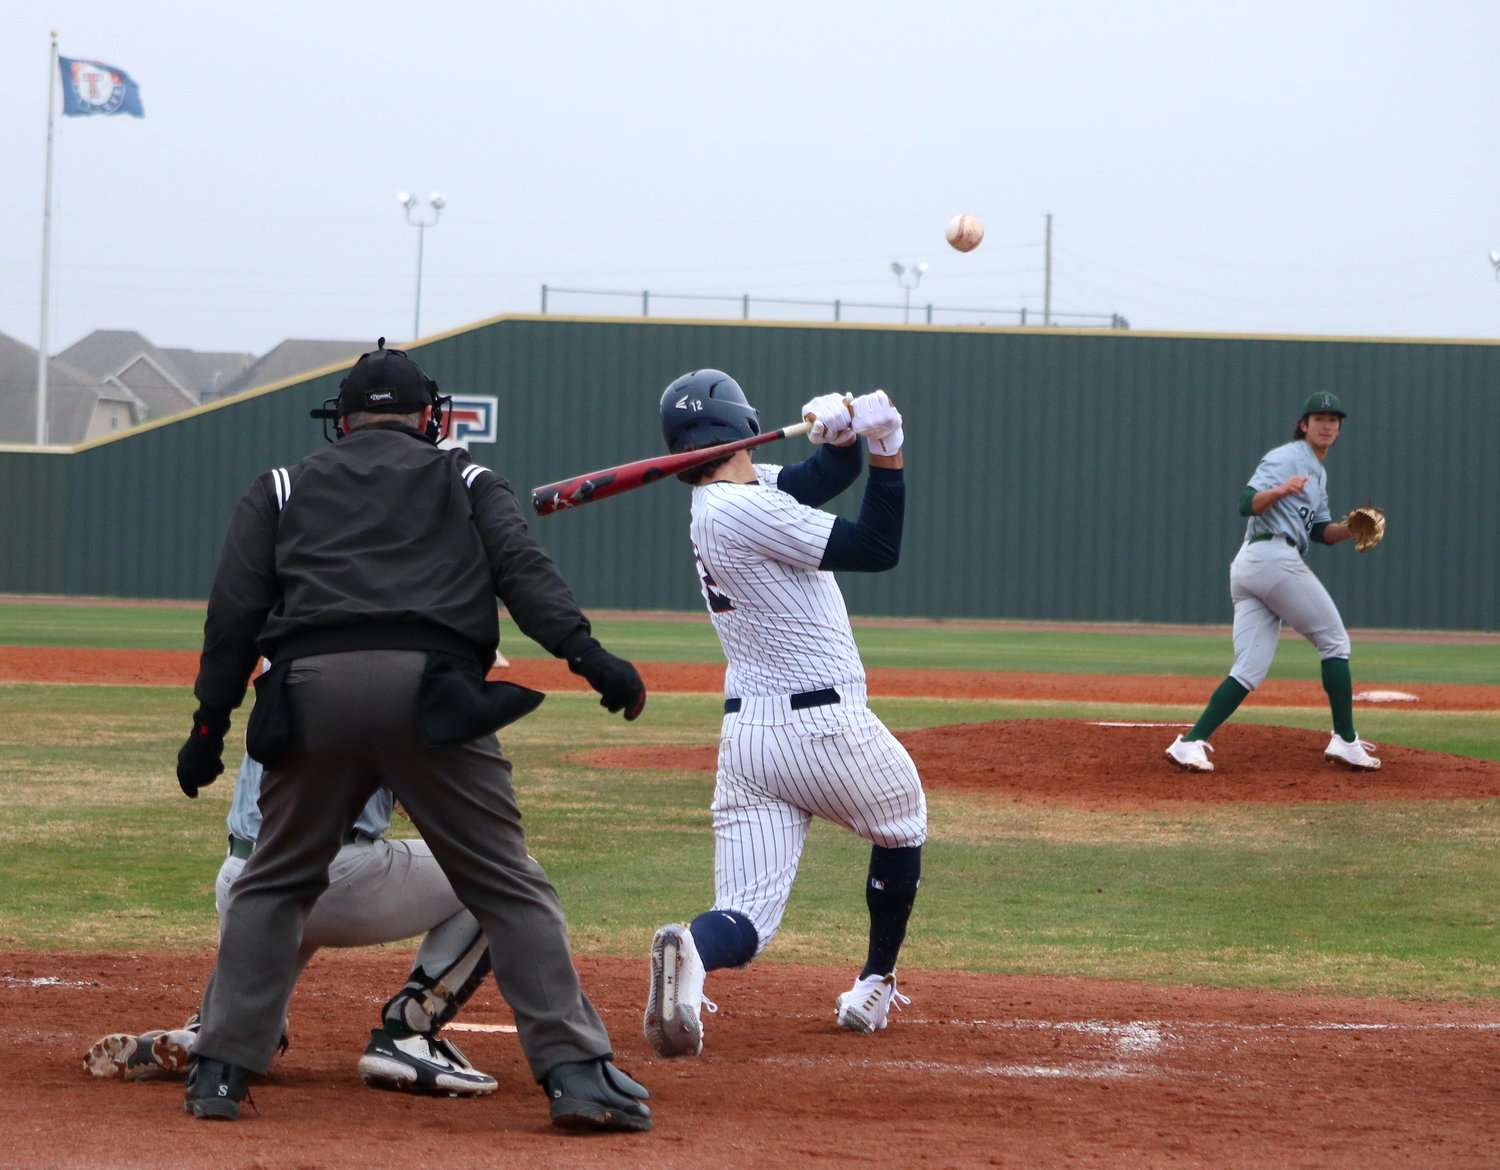 Jace LaViolette hits during Thursday’s game between Tompkins and San Antonio Reagan at the Tompkins baseball field.